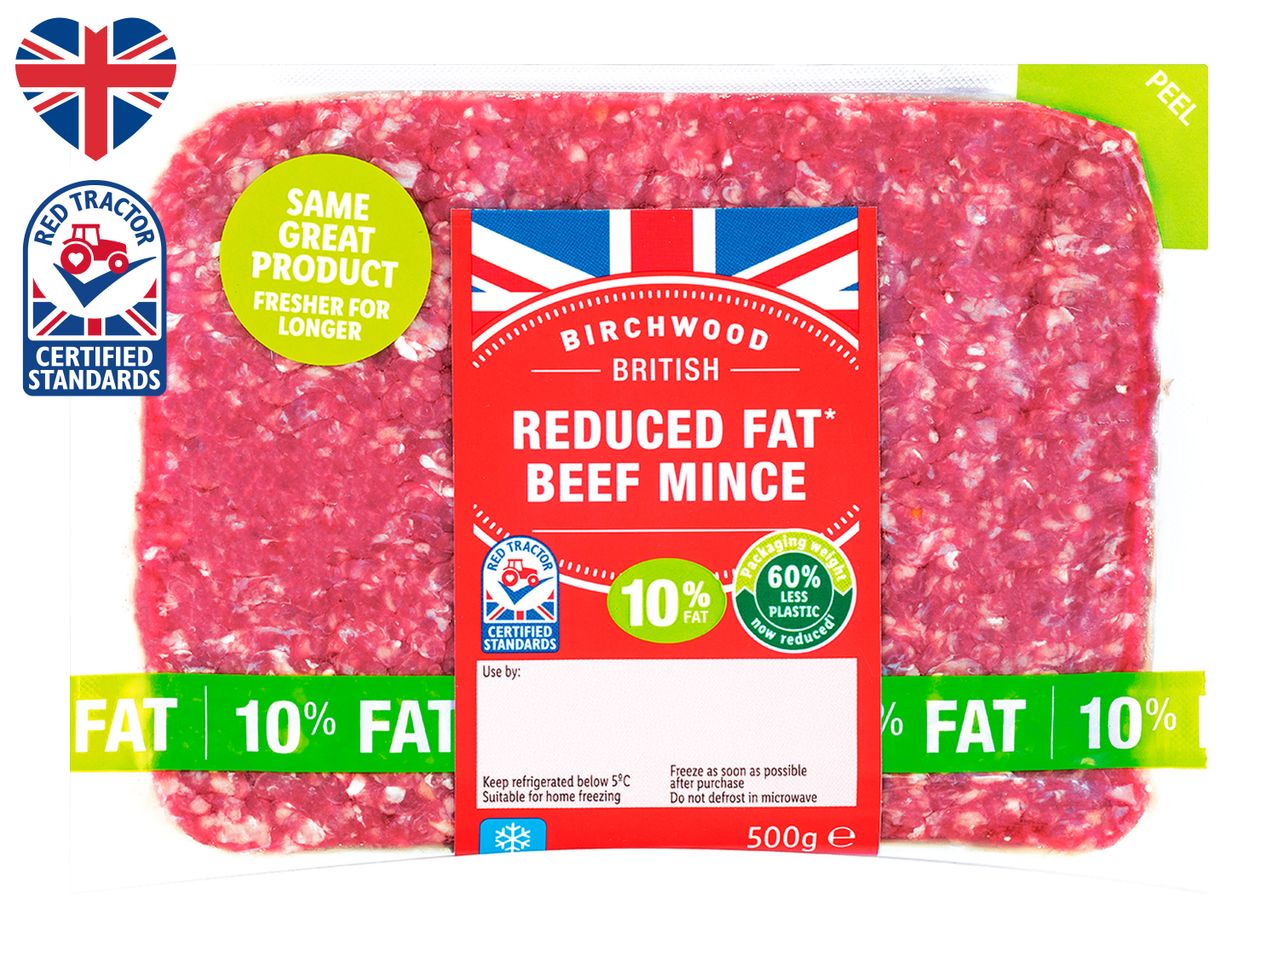 Go to full screen view: Birchwood British Reduced Fat Beef Mince 10% Fat - Image 1